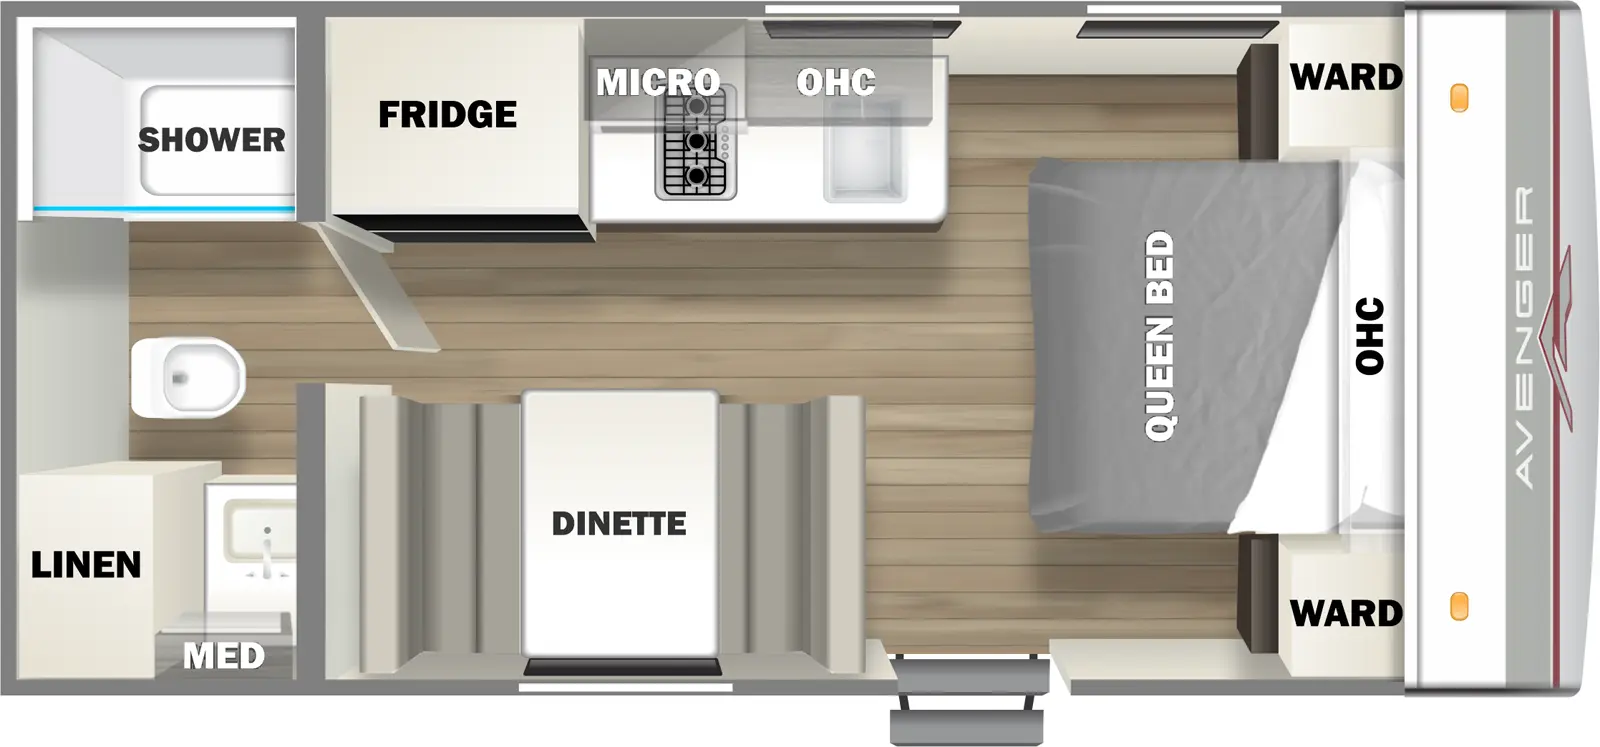 The 16FQ has zero slideouts and one entry. Interior layout front to back: foot facing queen bed with overhead cabinet and wardrobes on each side; off-door side kitchen counter with sink, overhead cabinet, cooktop, microwave, and refrigerator; door side entry, and dinette; rear full bathroom with medicine cabinet and linen closet.